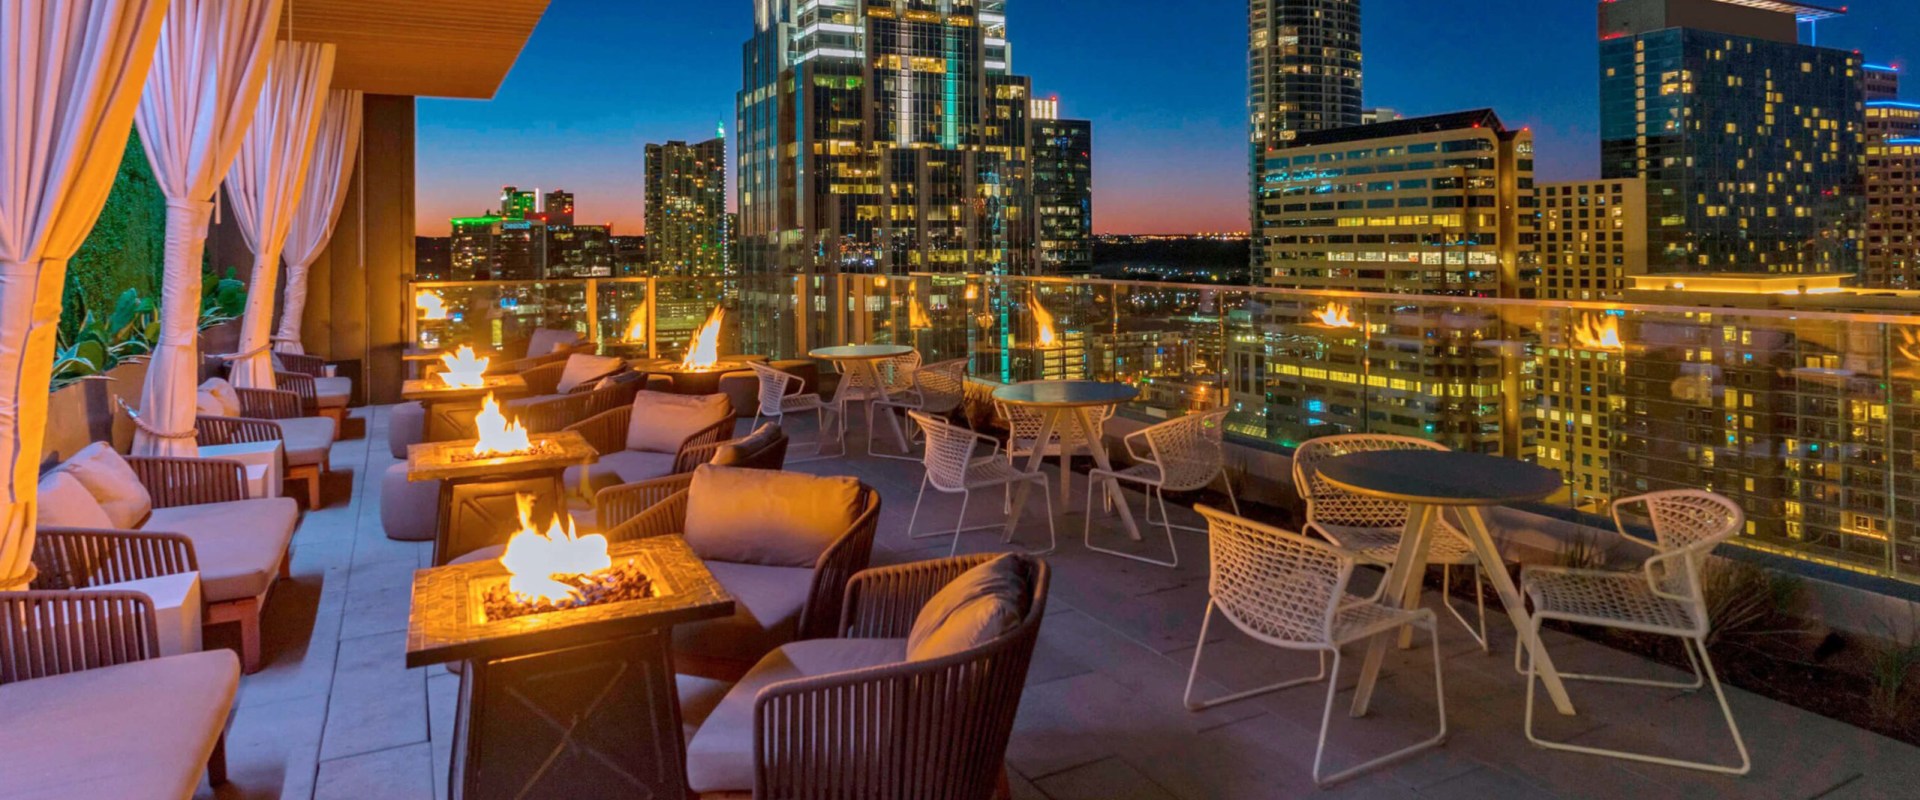 The Best Restaurants in Austin, Texas for Rooftop Dining